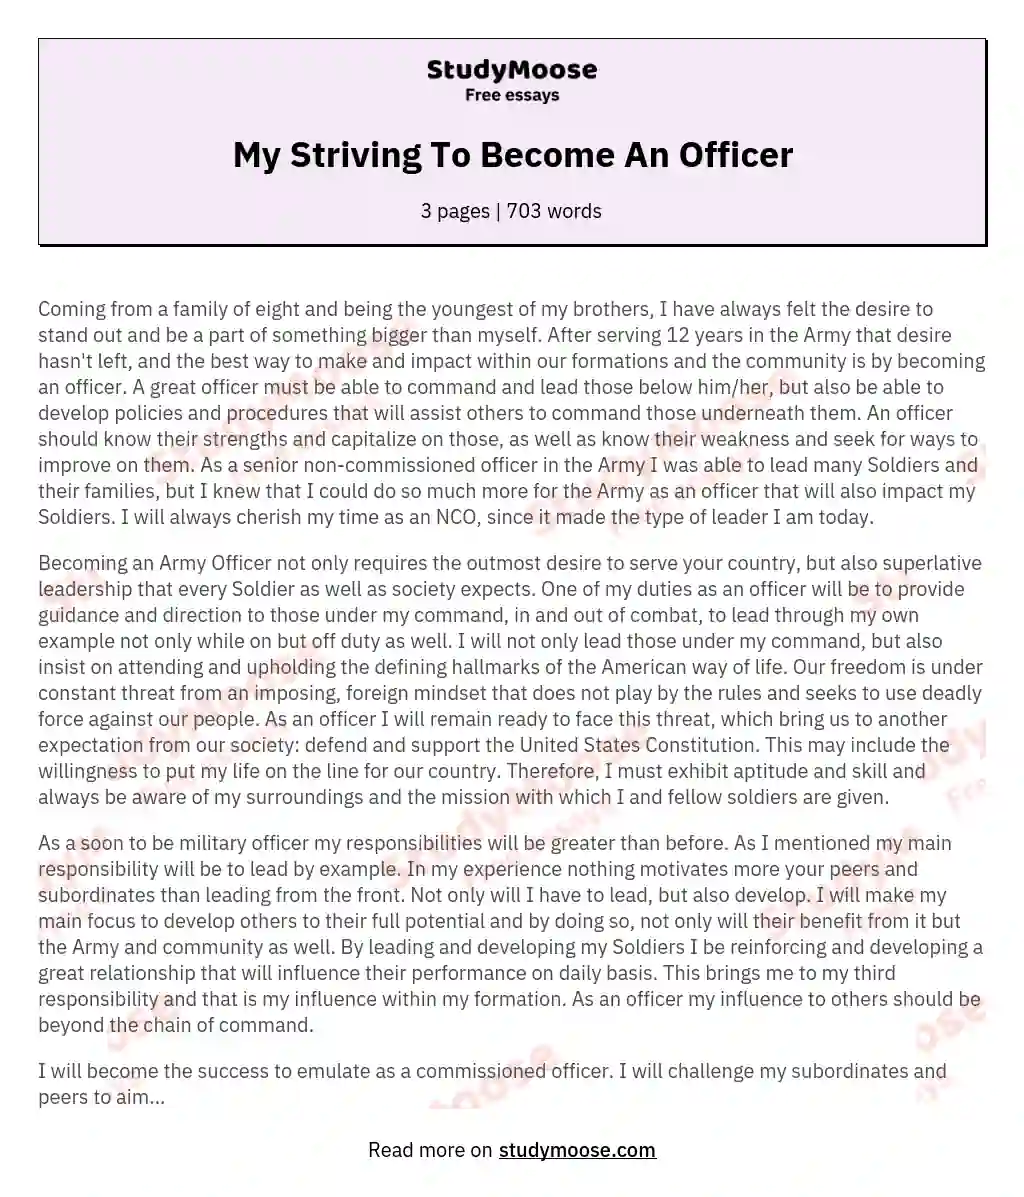 My Striving To Become An Officer essay